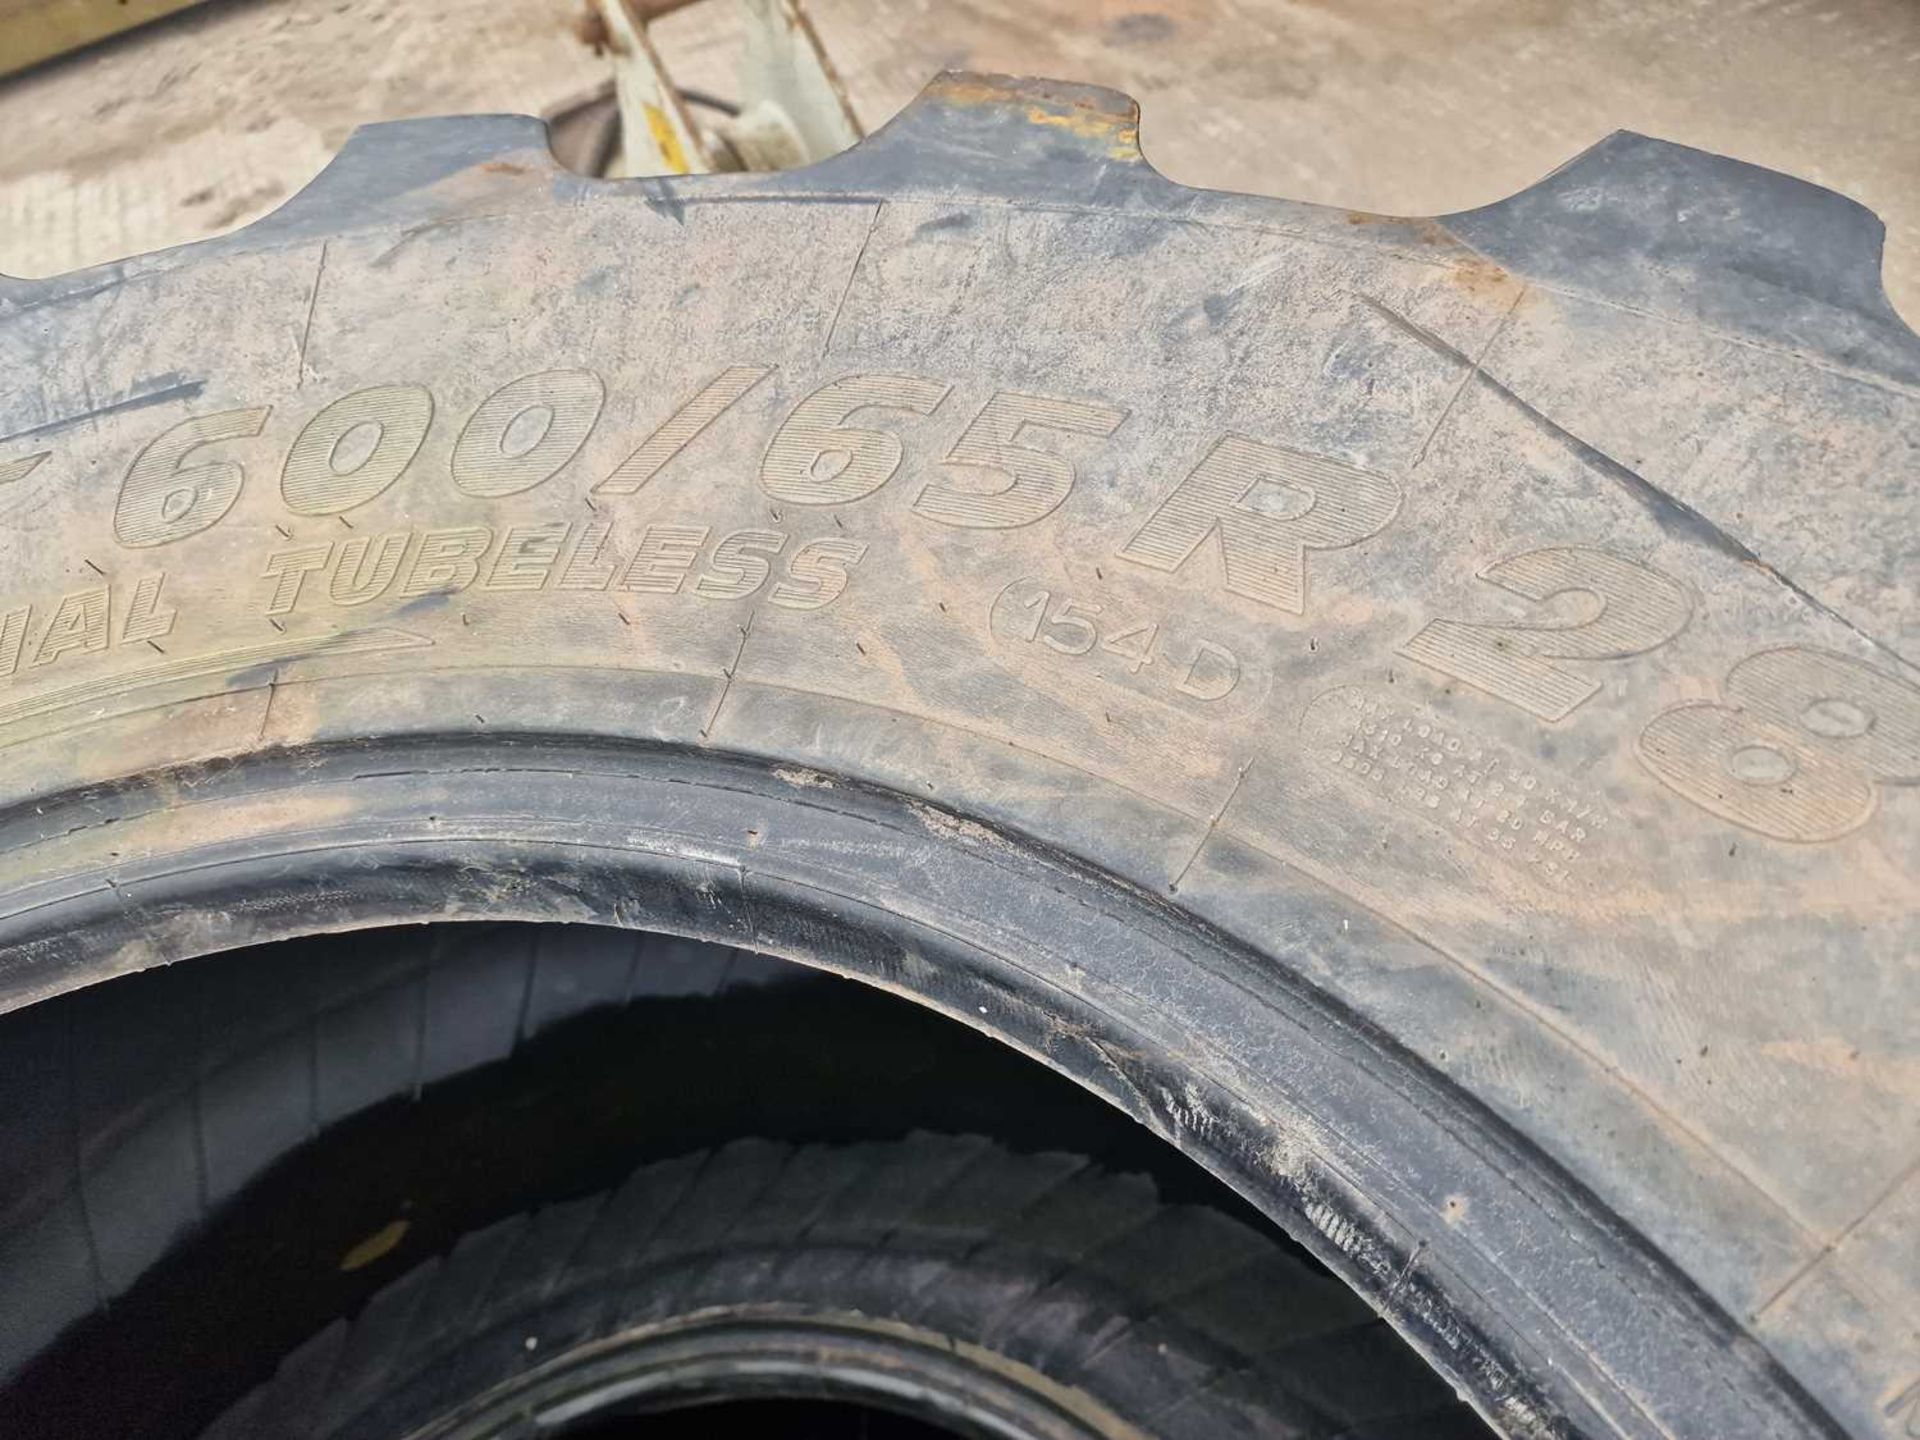 600/65R28 Tyre (2 of) - Image 6 of 6